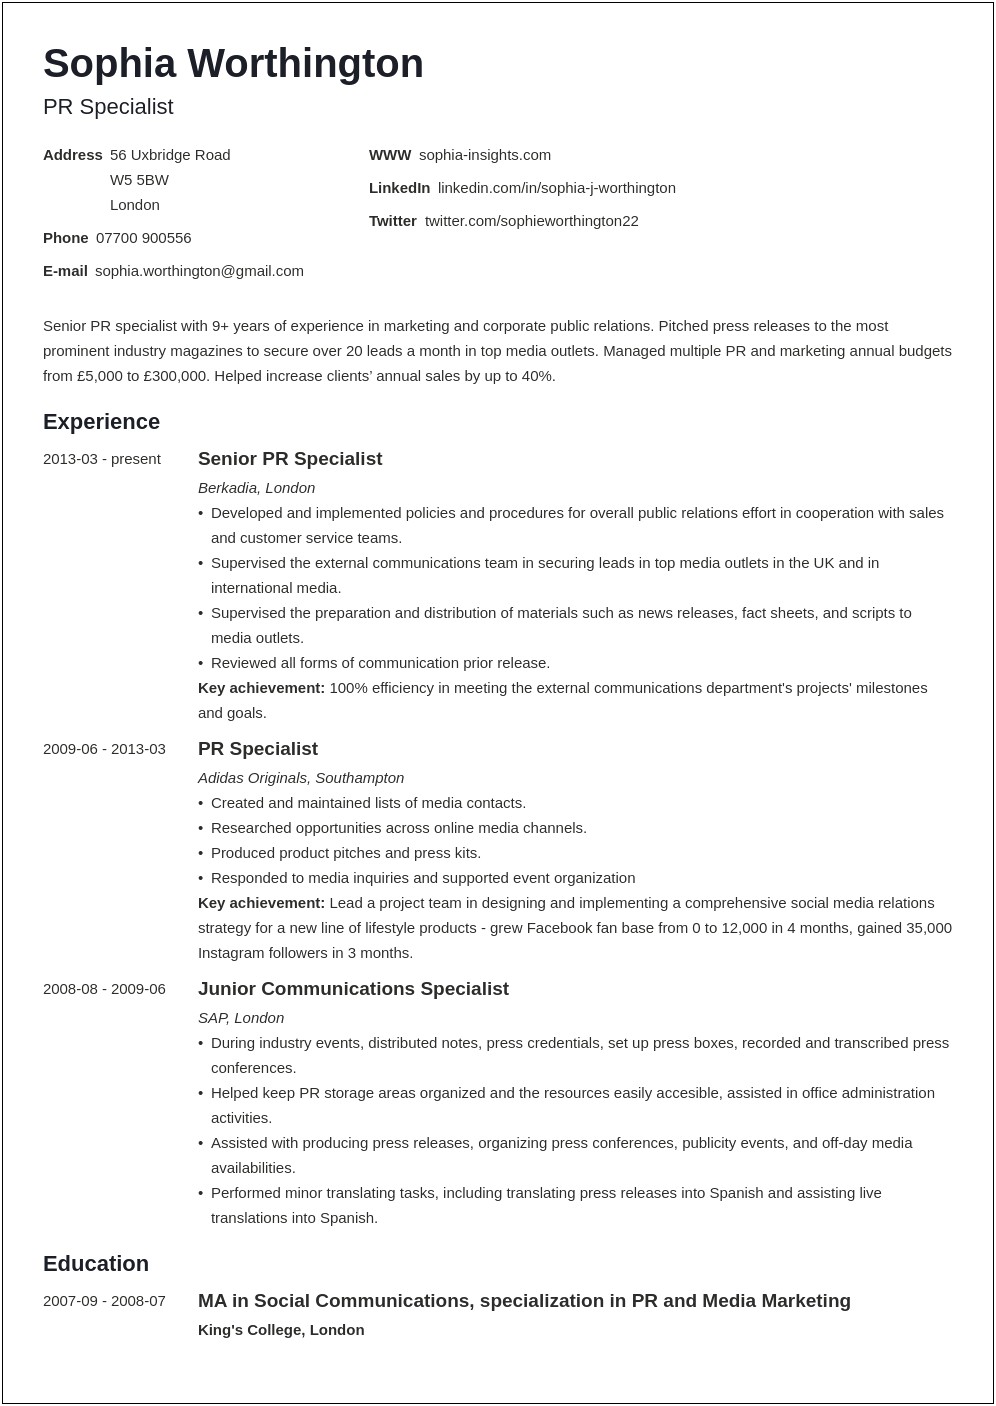 Sample Resume Images With Skills Listed